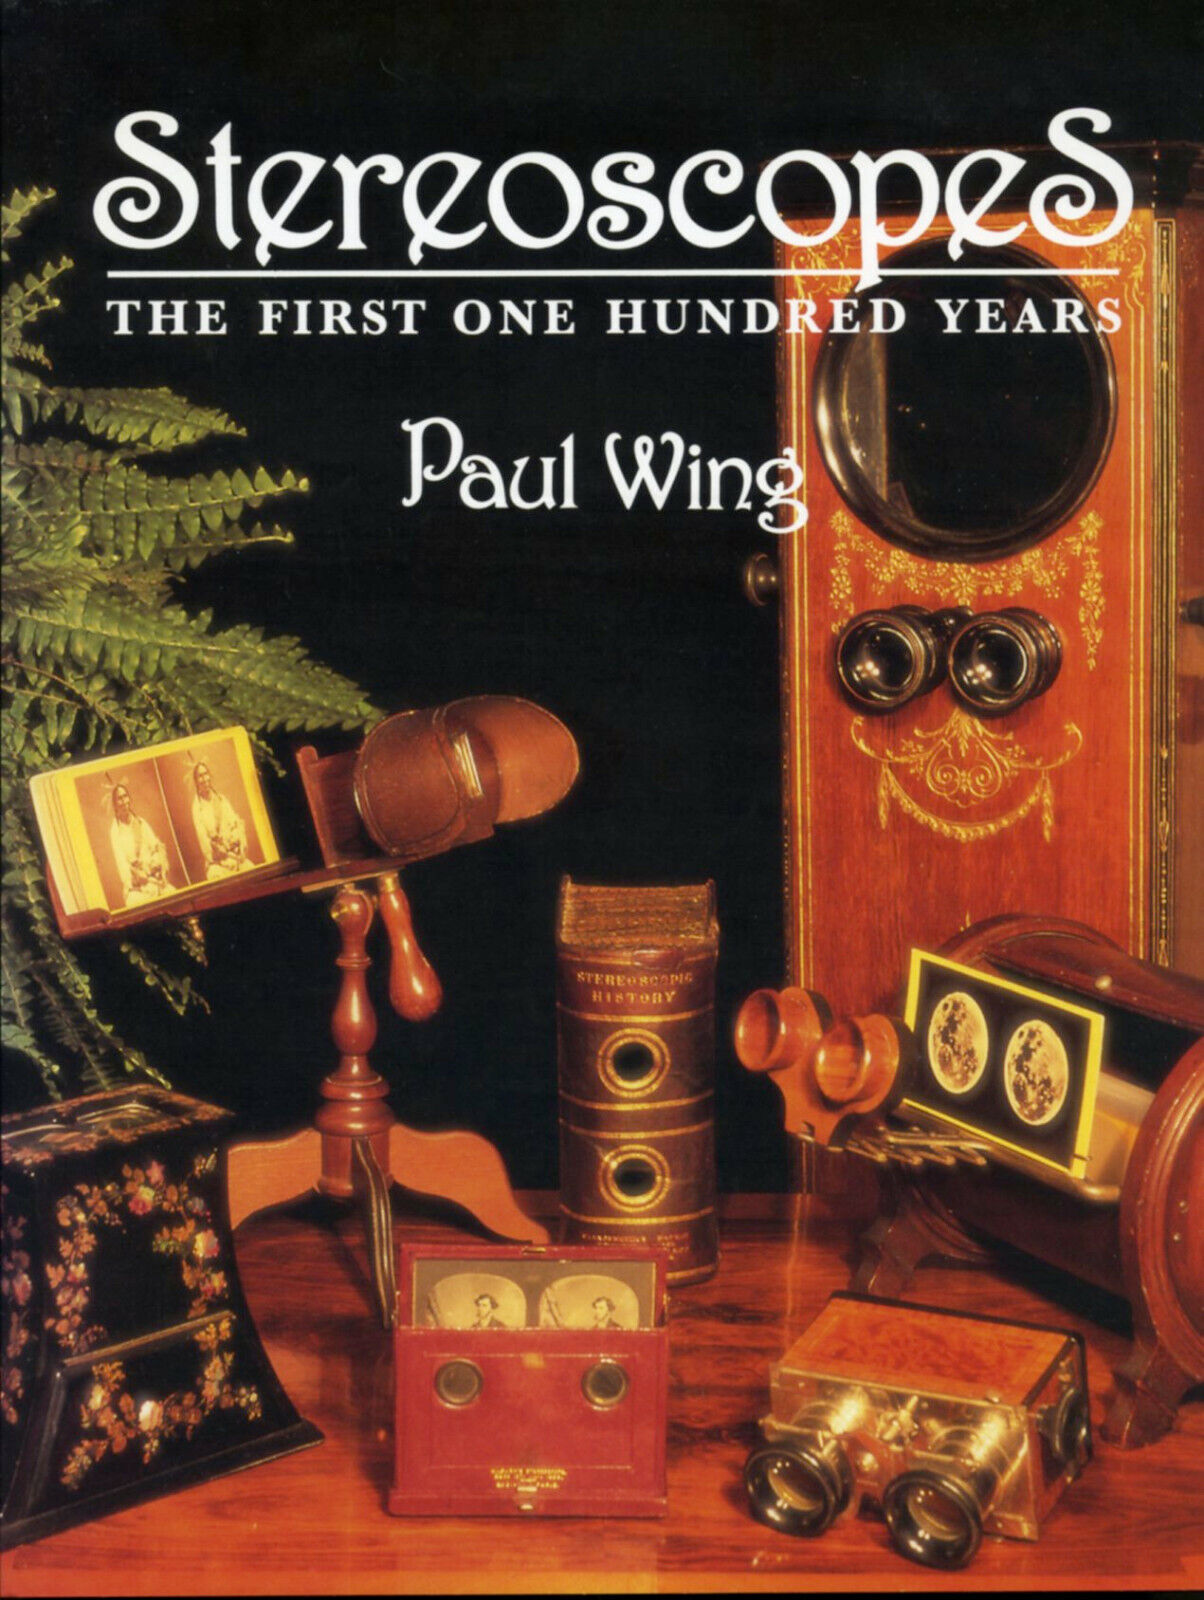 STEREOSCOPES: THE FIRST ONE HUNDRED YEARS by Paul Wing, 1996 softbound NEW